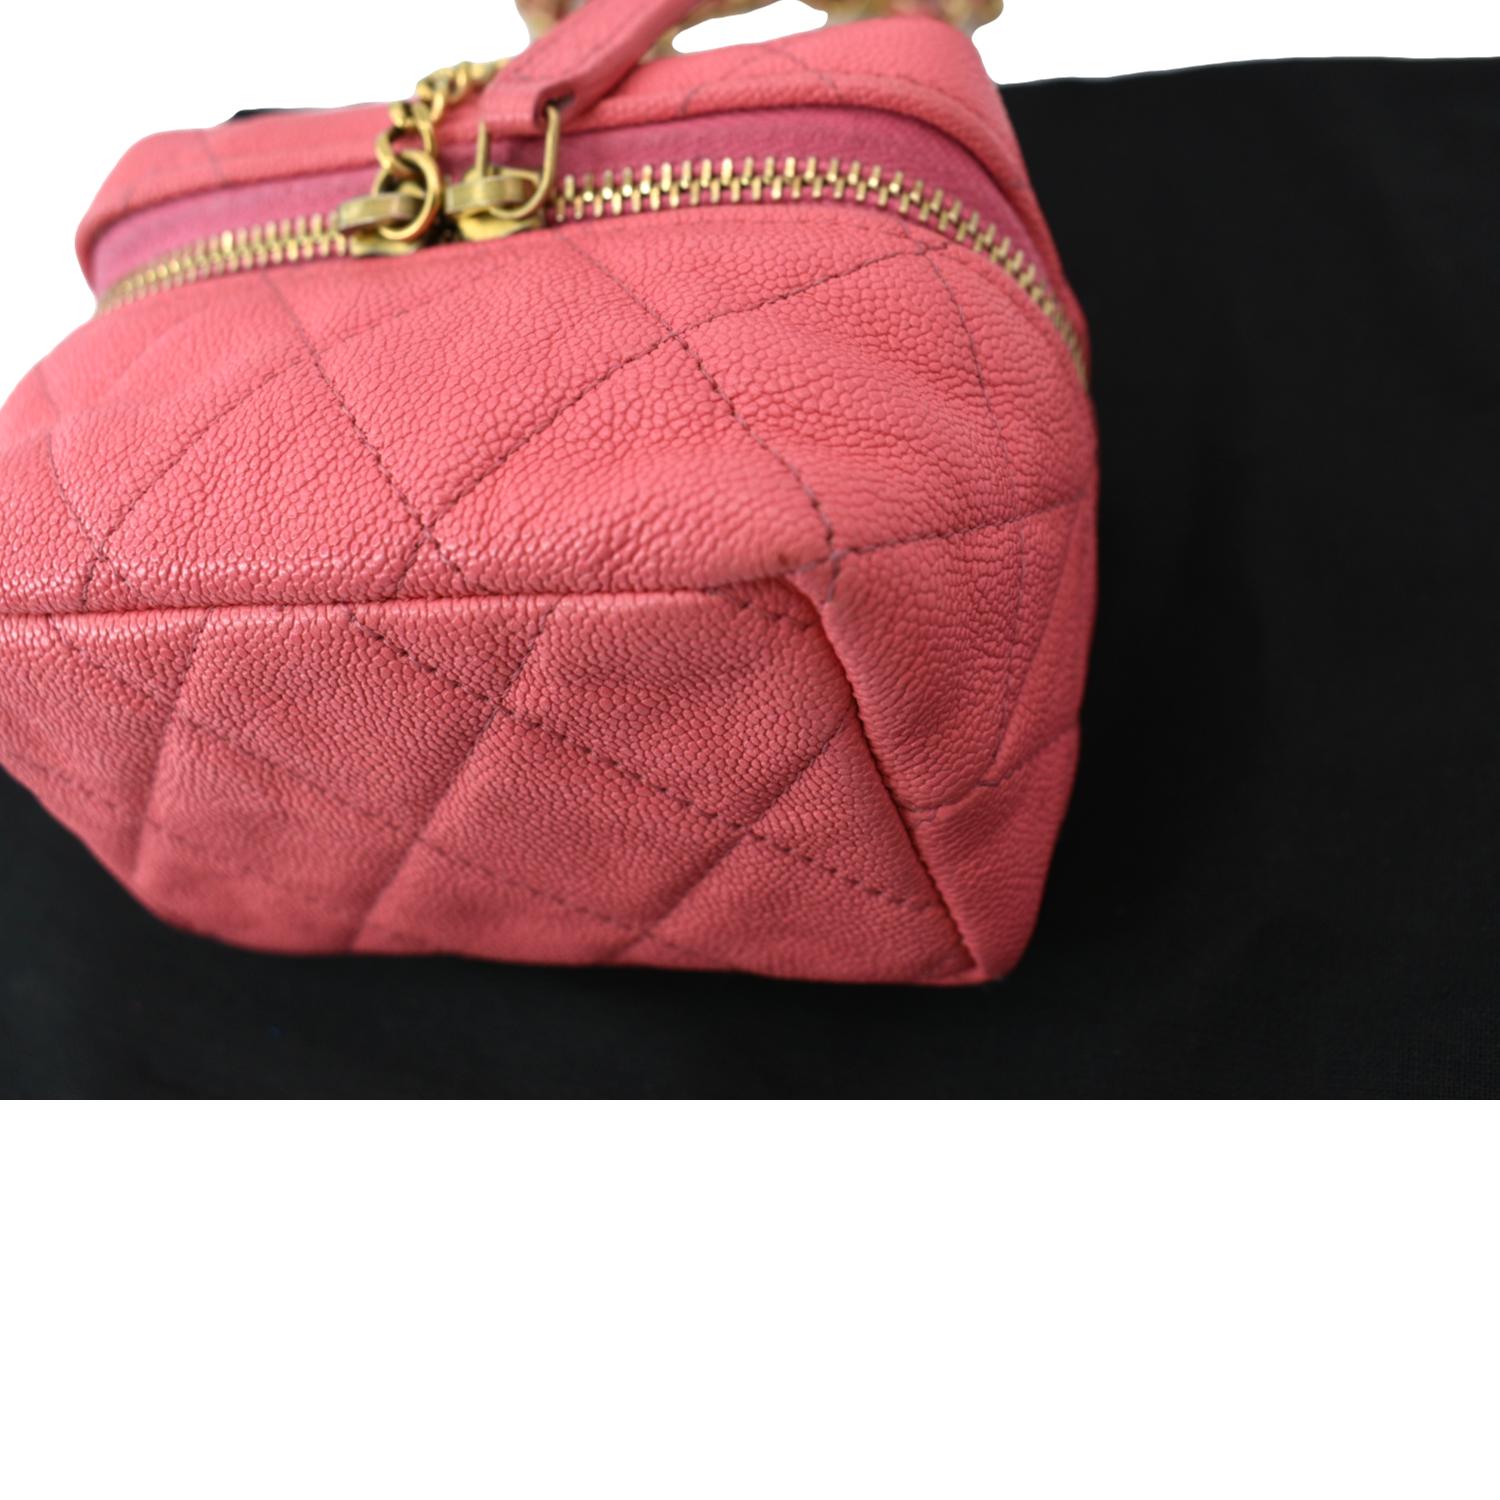 Chanel Vanity Case Small Leather Crossbody Bag Pink